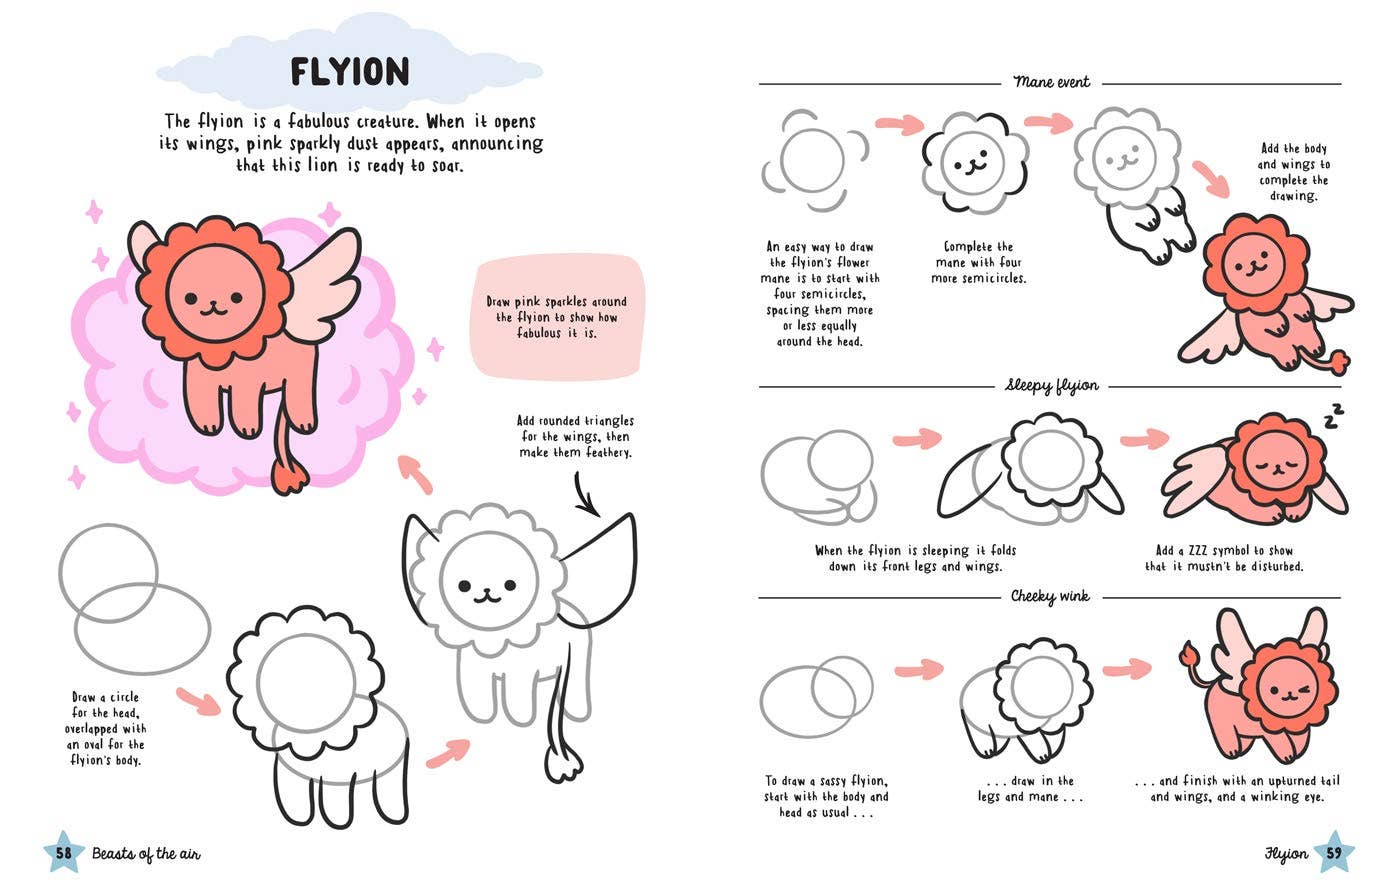 How to Draw Cute Beasts by Angela Nguyen